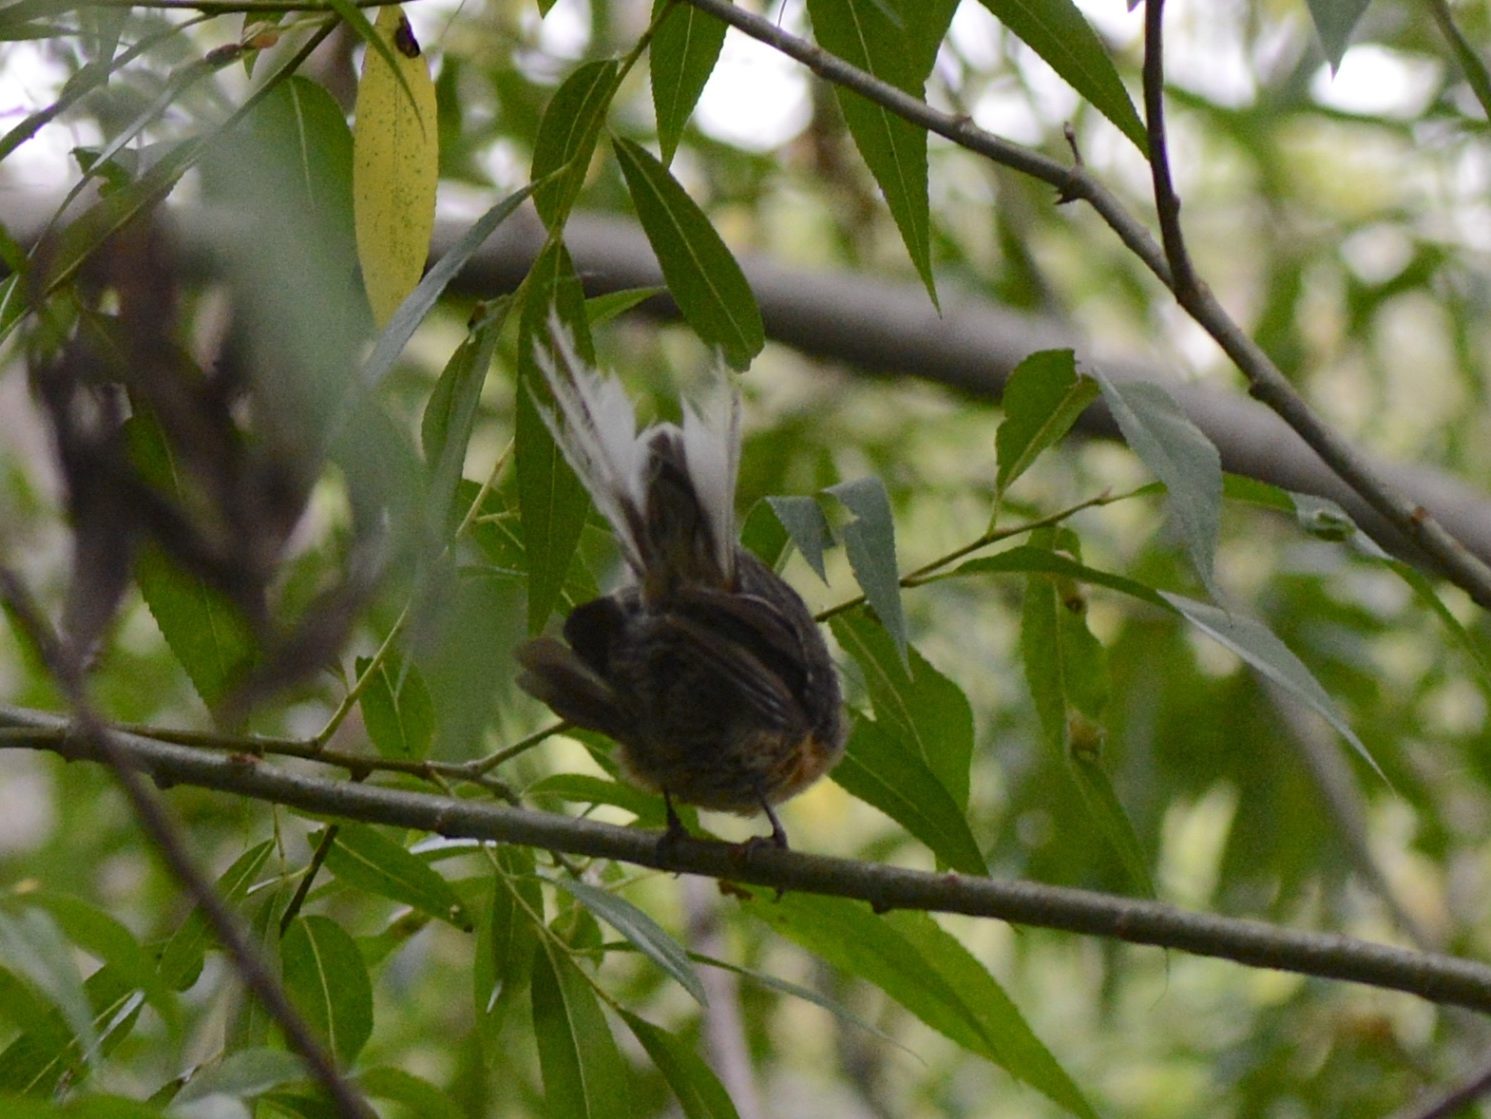 A fantail on a branch.